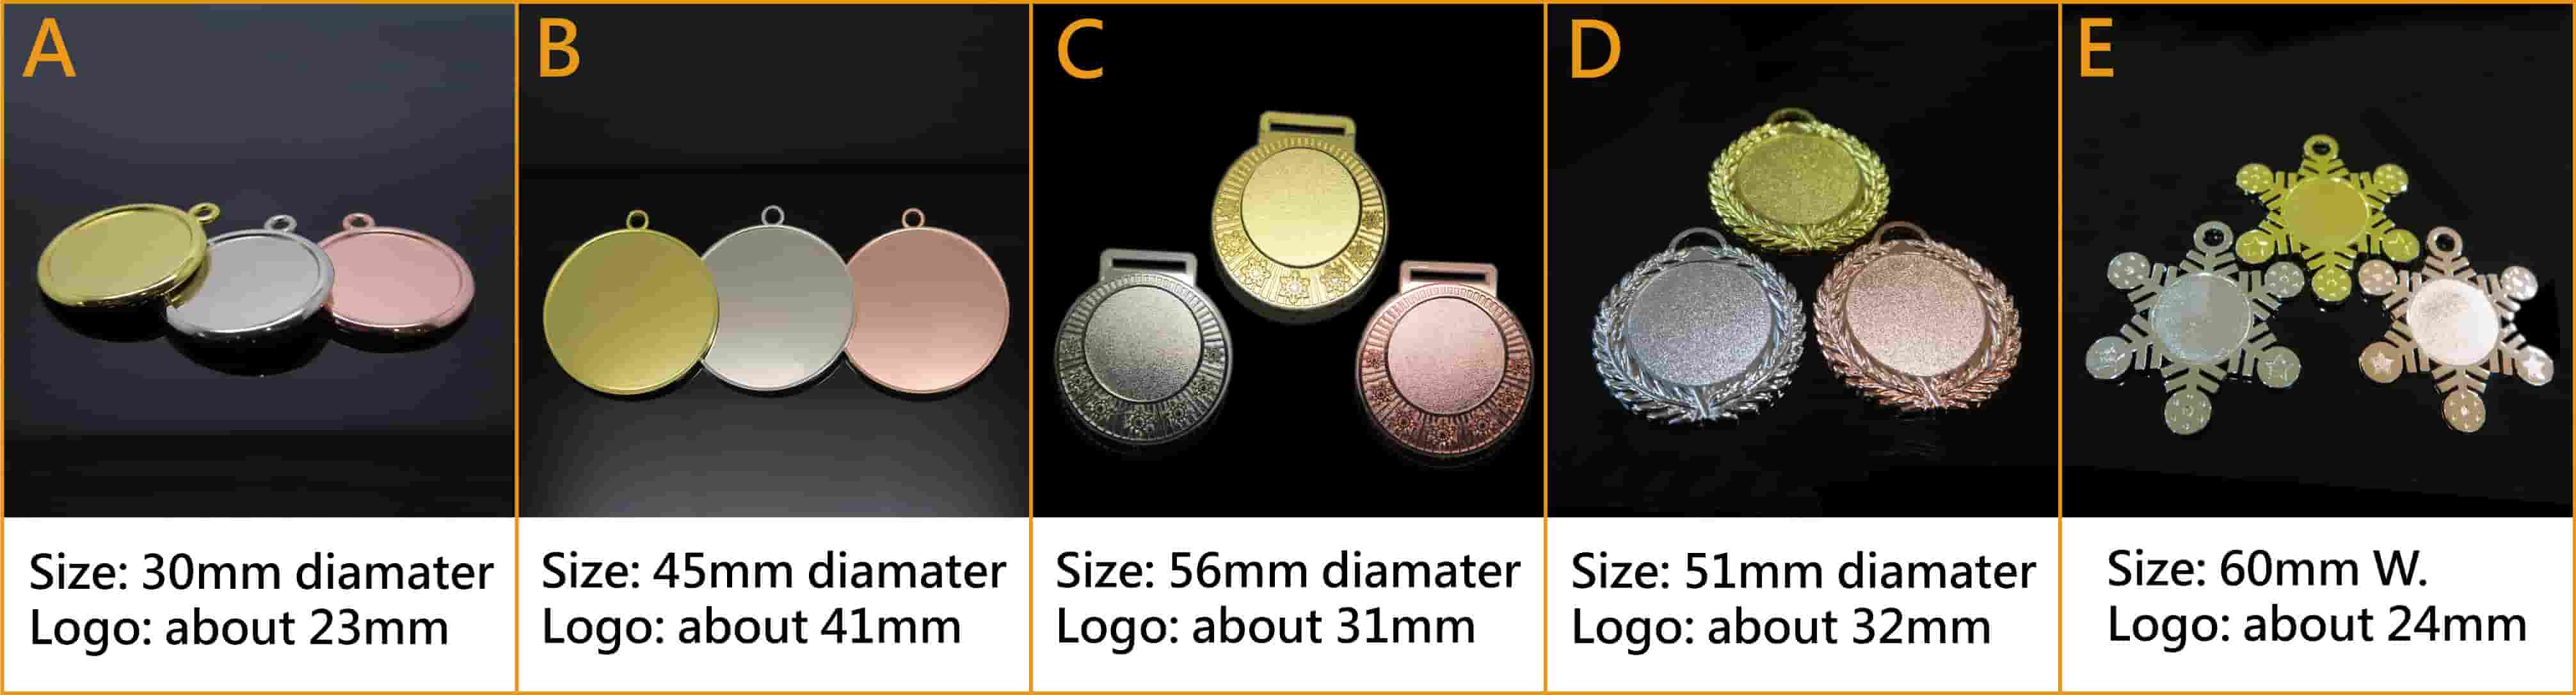 Existing Designs of Blank medals